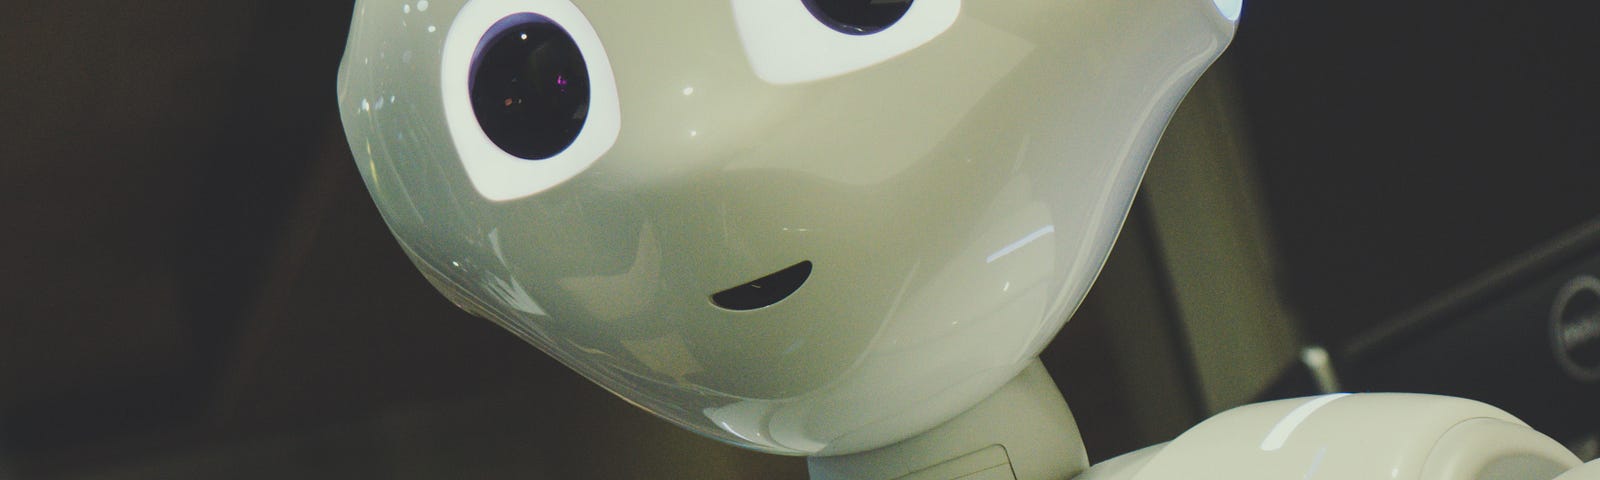 Robot with human features, smiling